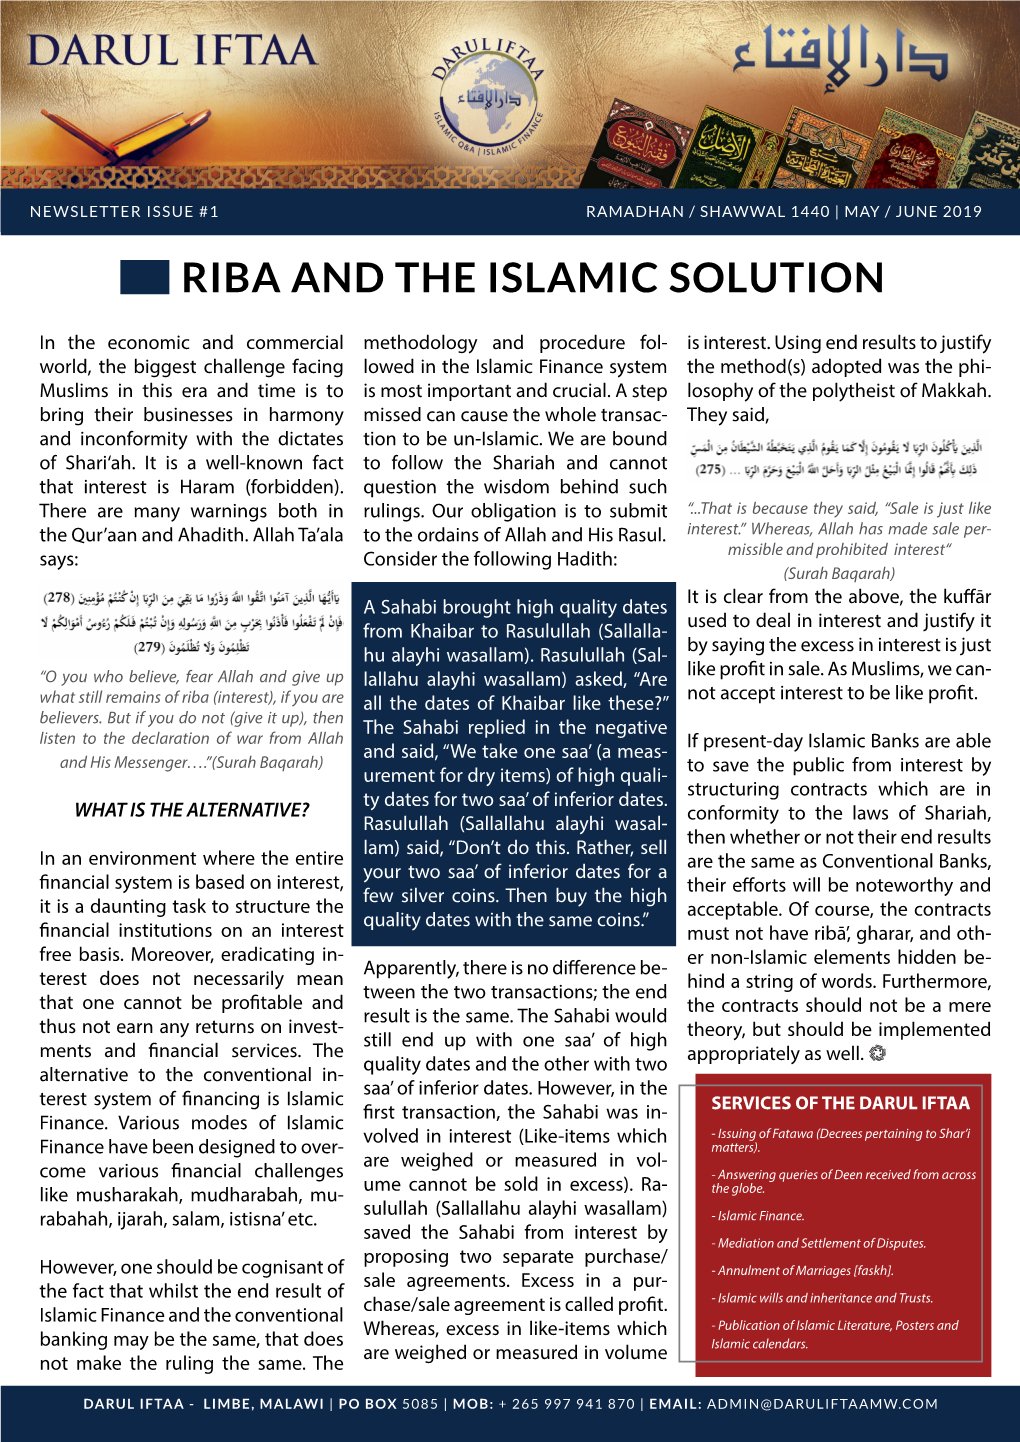 Riba and the Islamic Solution